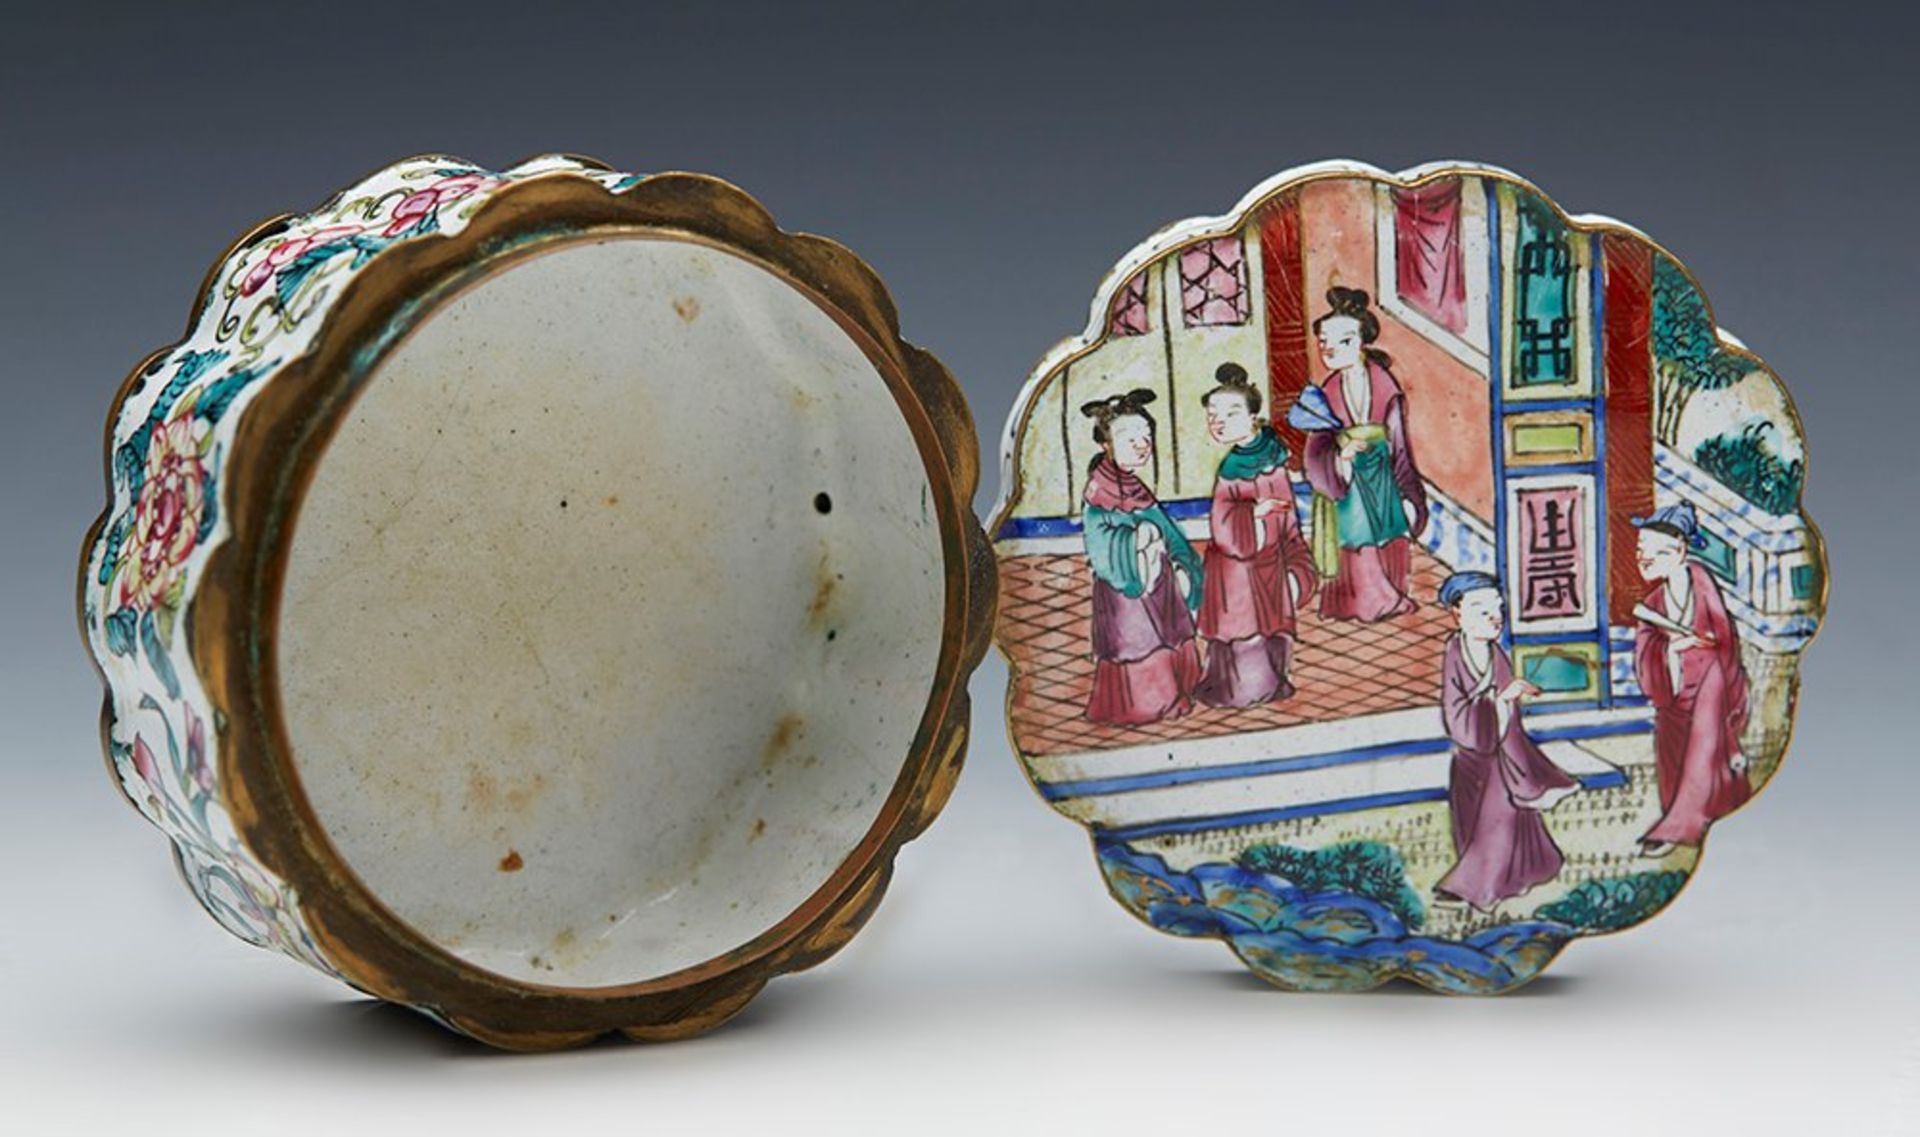 Antique Chinese Canton Enamel Lidded Box With Figures C.1800